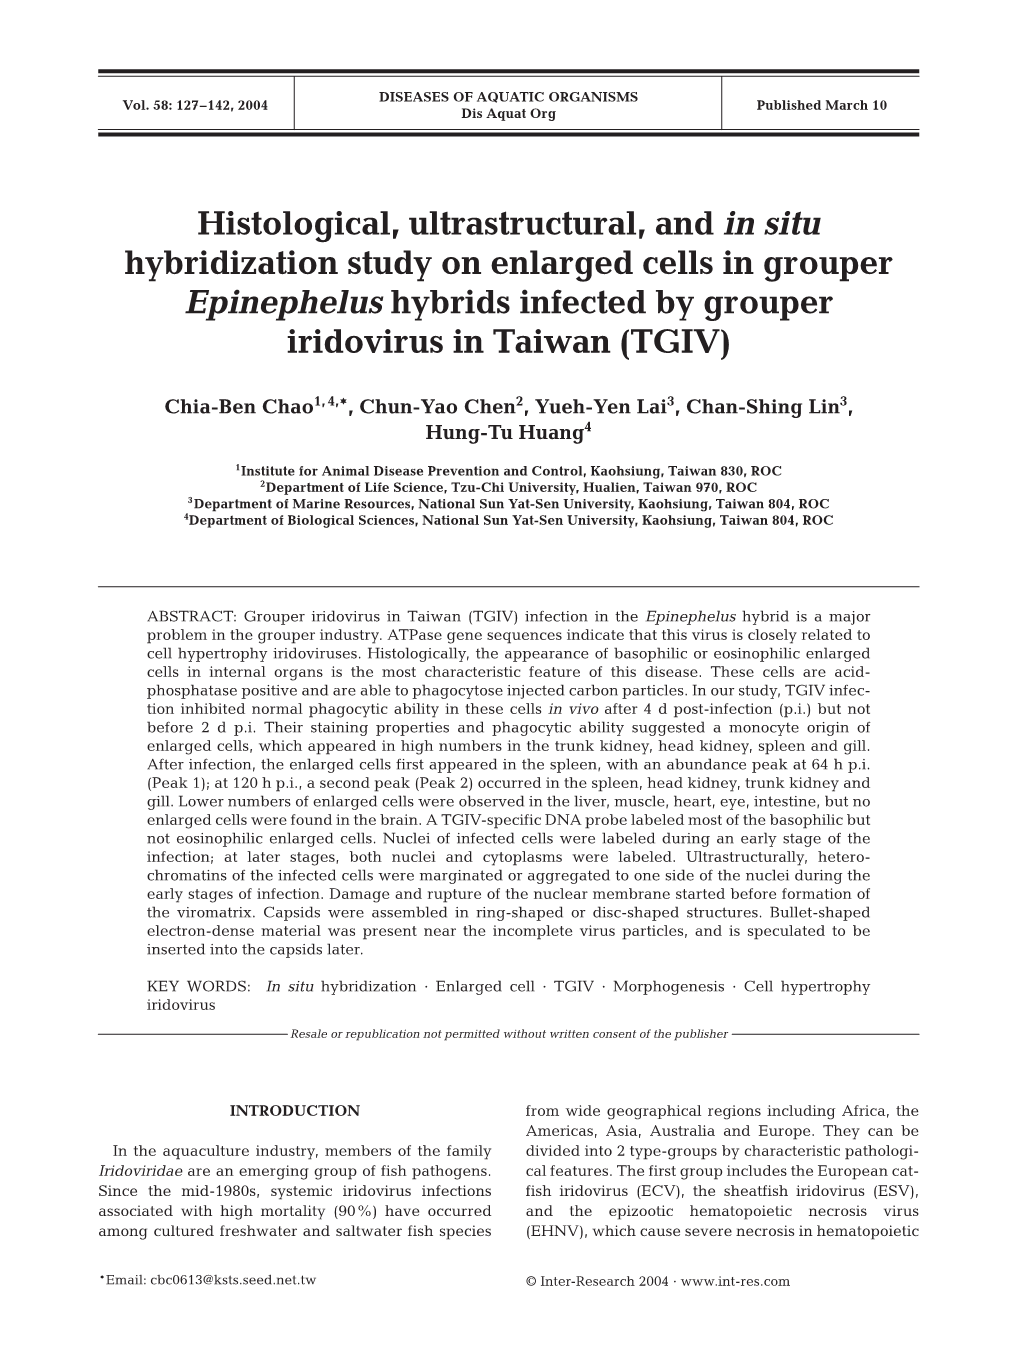 Histological, Ultrastructural, and in Situ Hybridization Study on Enlarged Cells in Grouper Epinephelus Hybrids Infected by Grouper Iridovirus in Taiwan (TGIV)